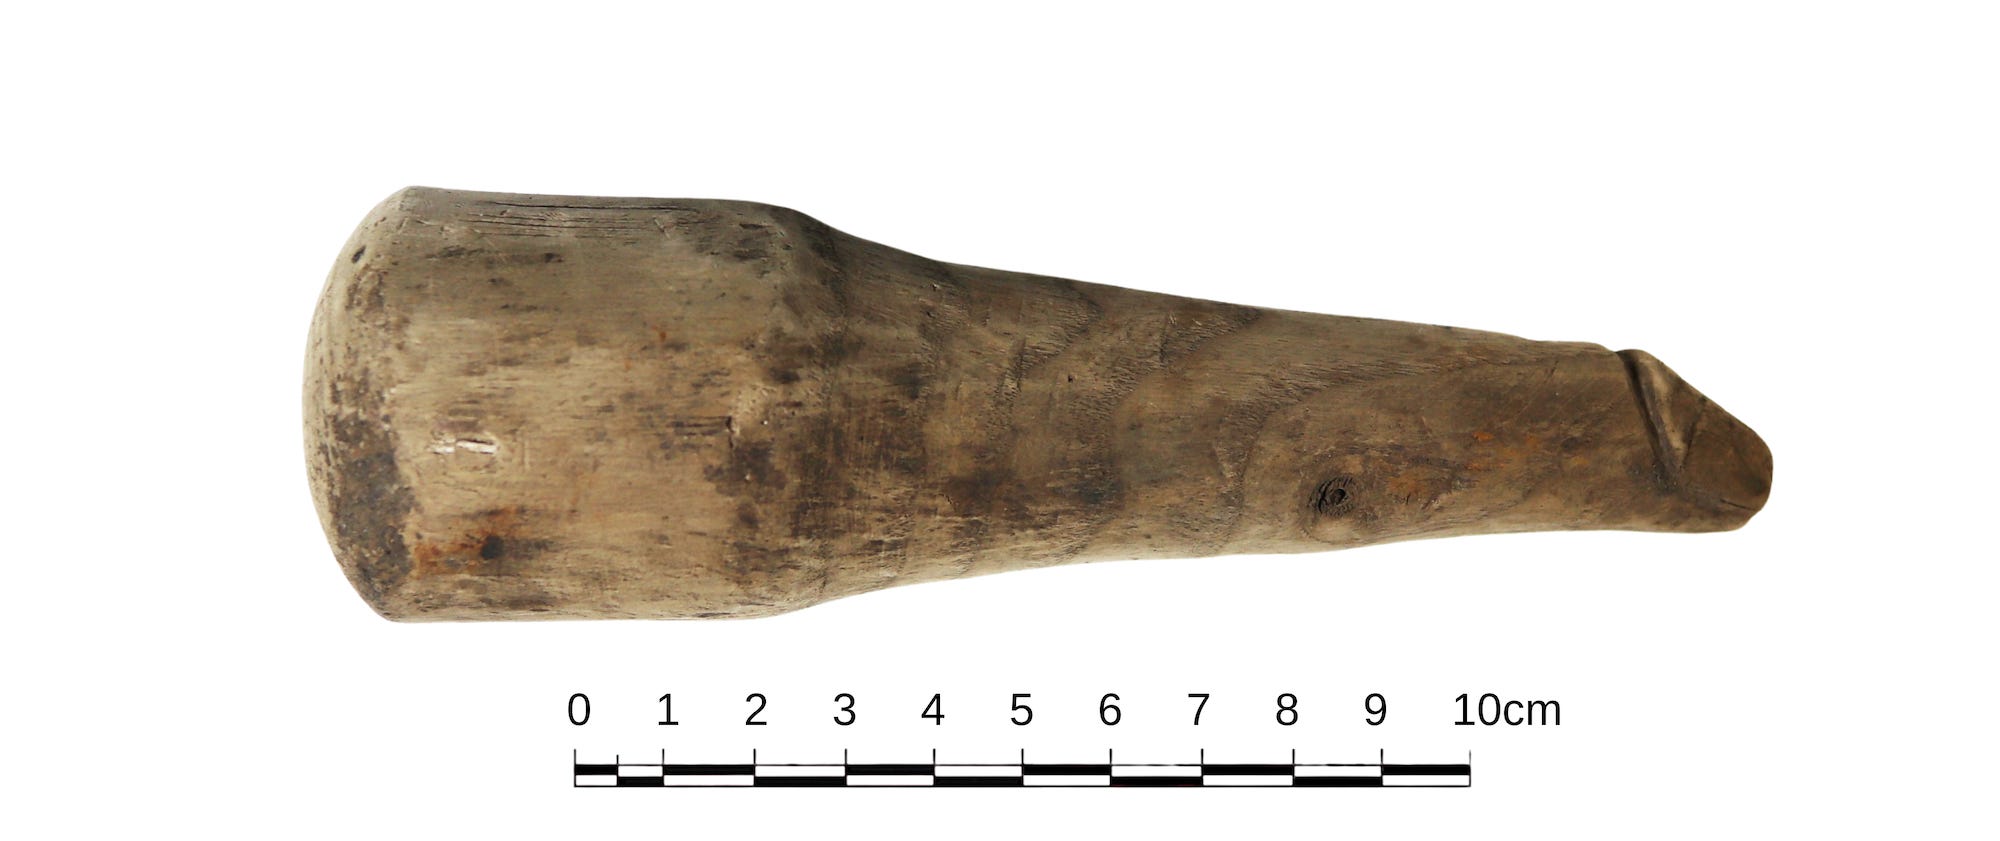 A phallic wooden object found at the ancient roman site of Vindolanda, shown with a cm scale indicating it is about 6 inches long.